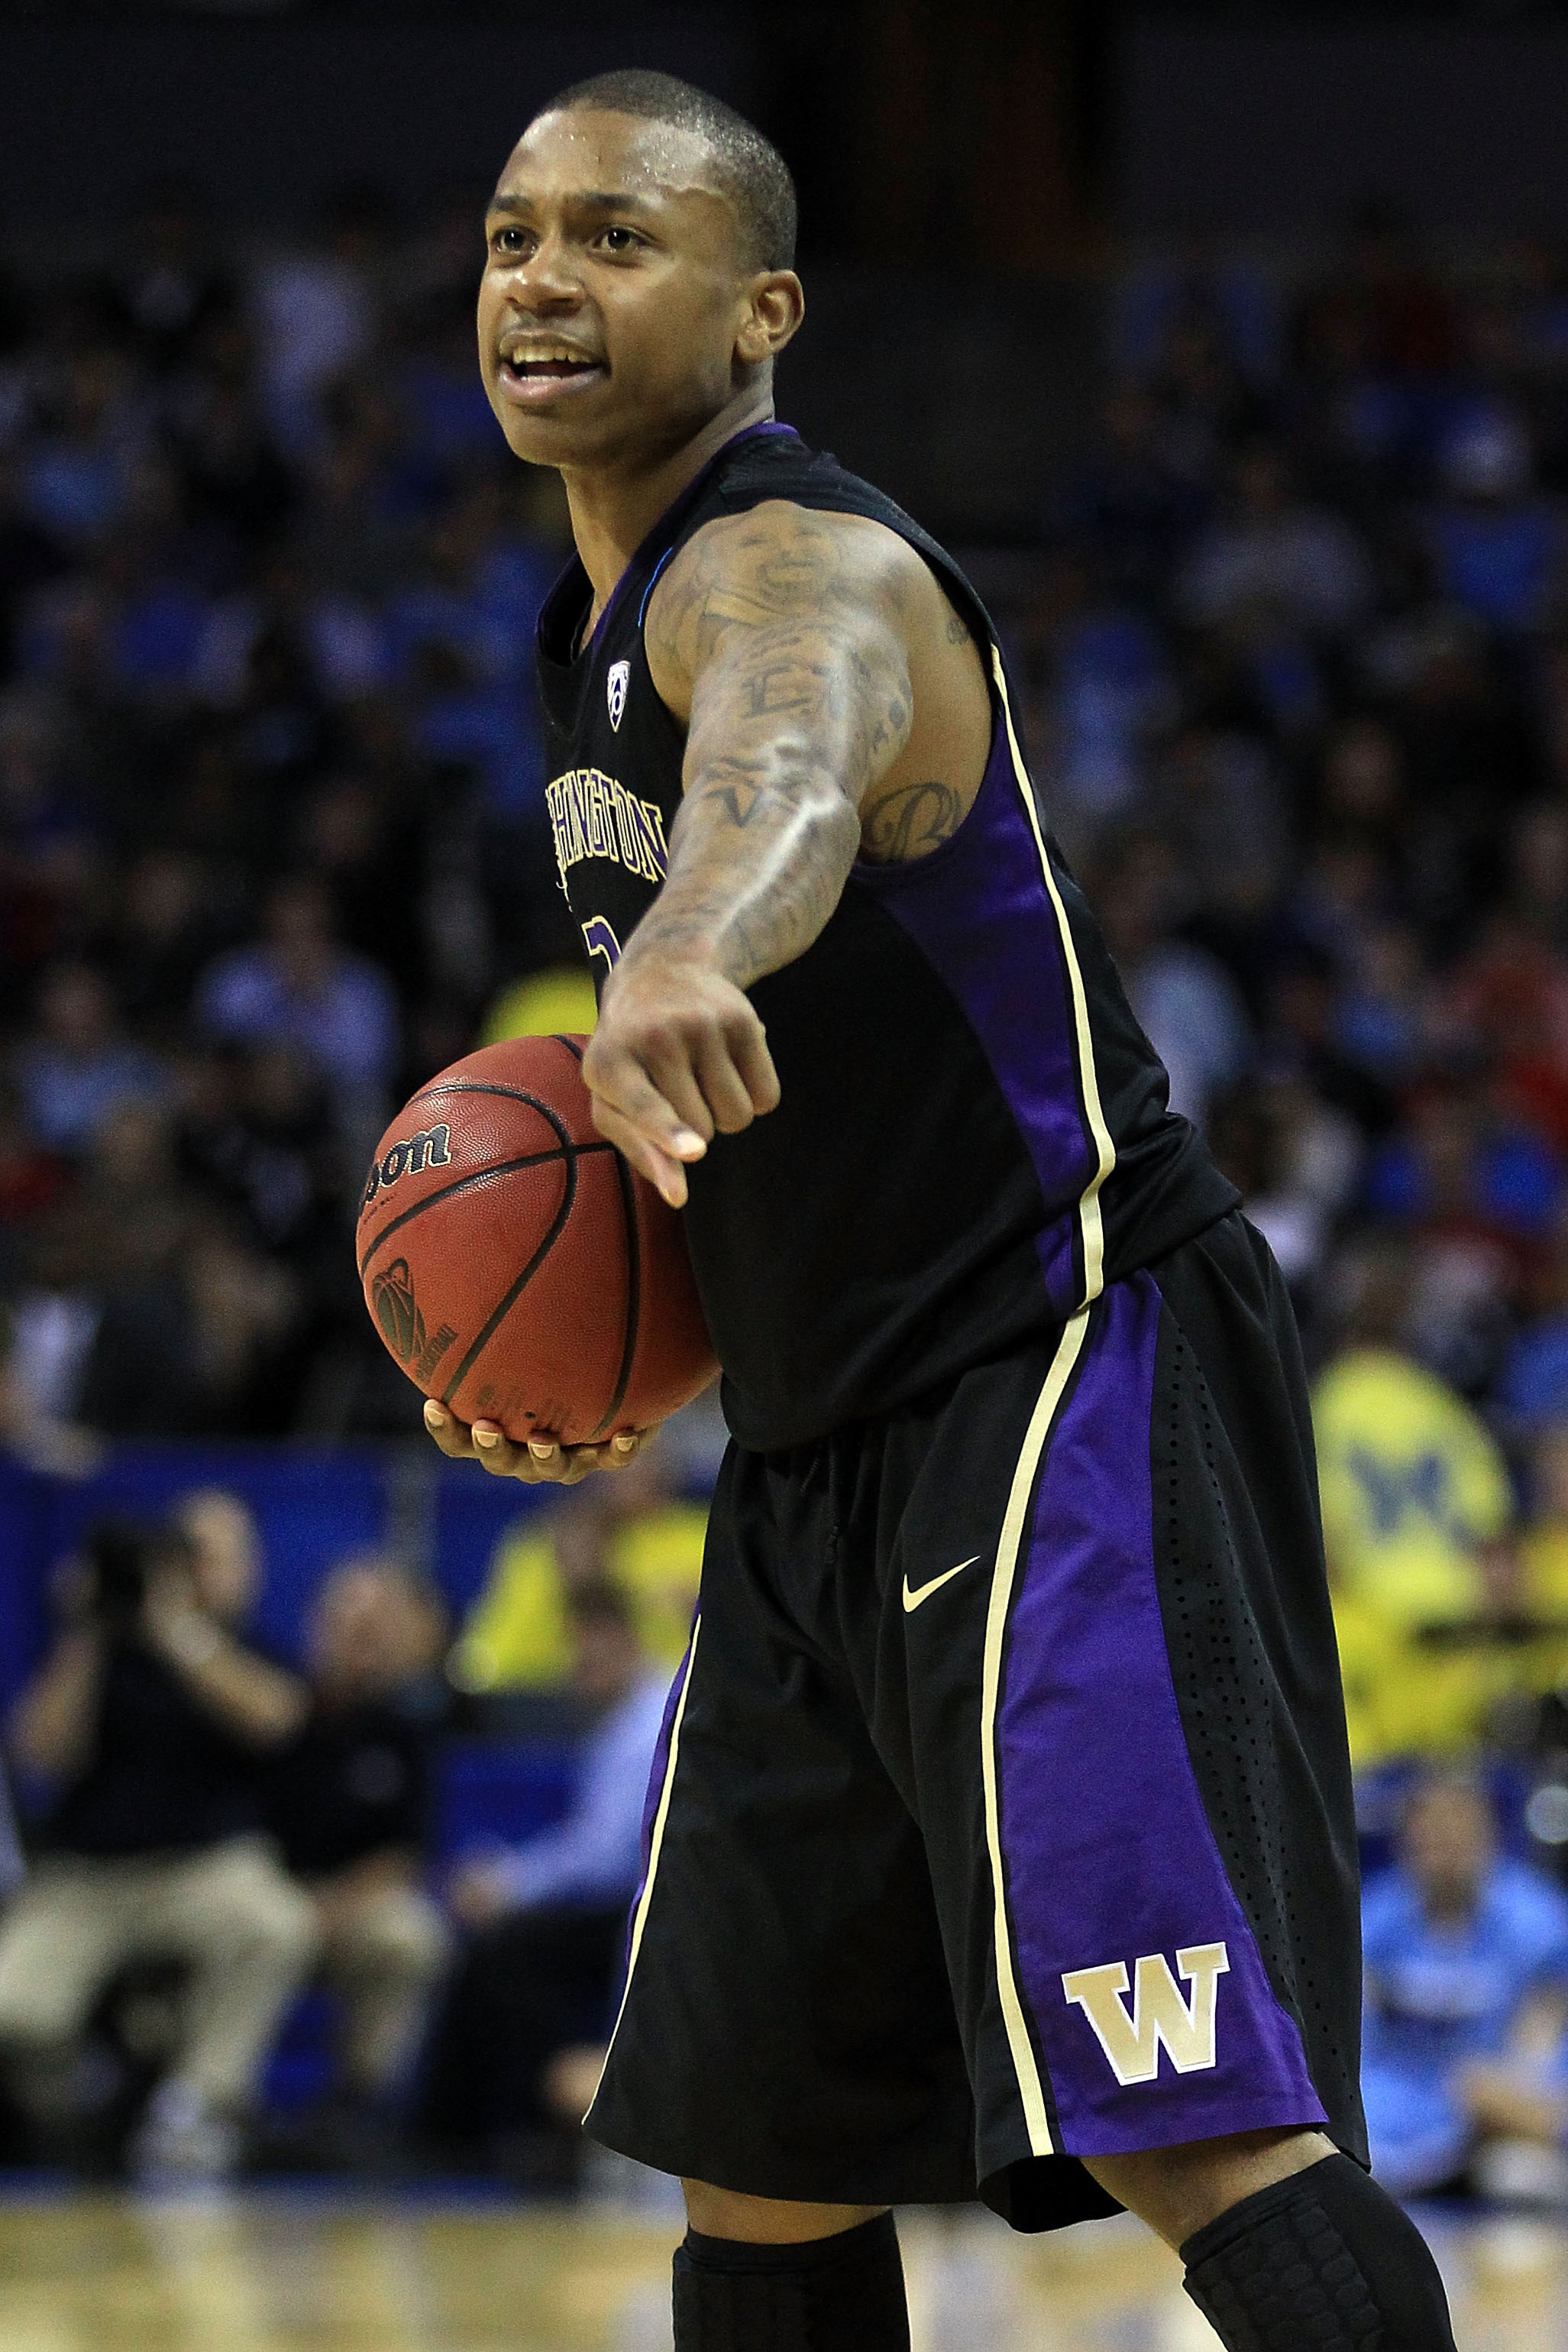 CHARLOTTE, NC - MARCH 20:  Isaiah Thomas #2 of the Washington Huskies points while taking on the North Carolina Tar Heels during the third round of the 2011 NCAA men's basketball tournament at Time Warner Cable Arena on March 20, 2011 in Charlotte, North